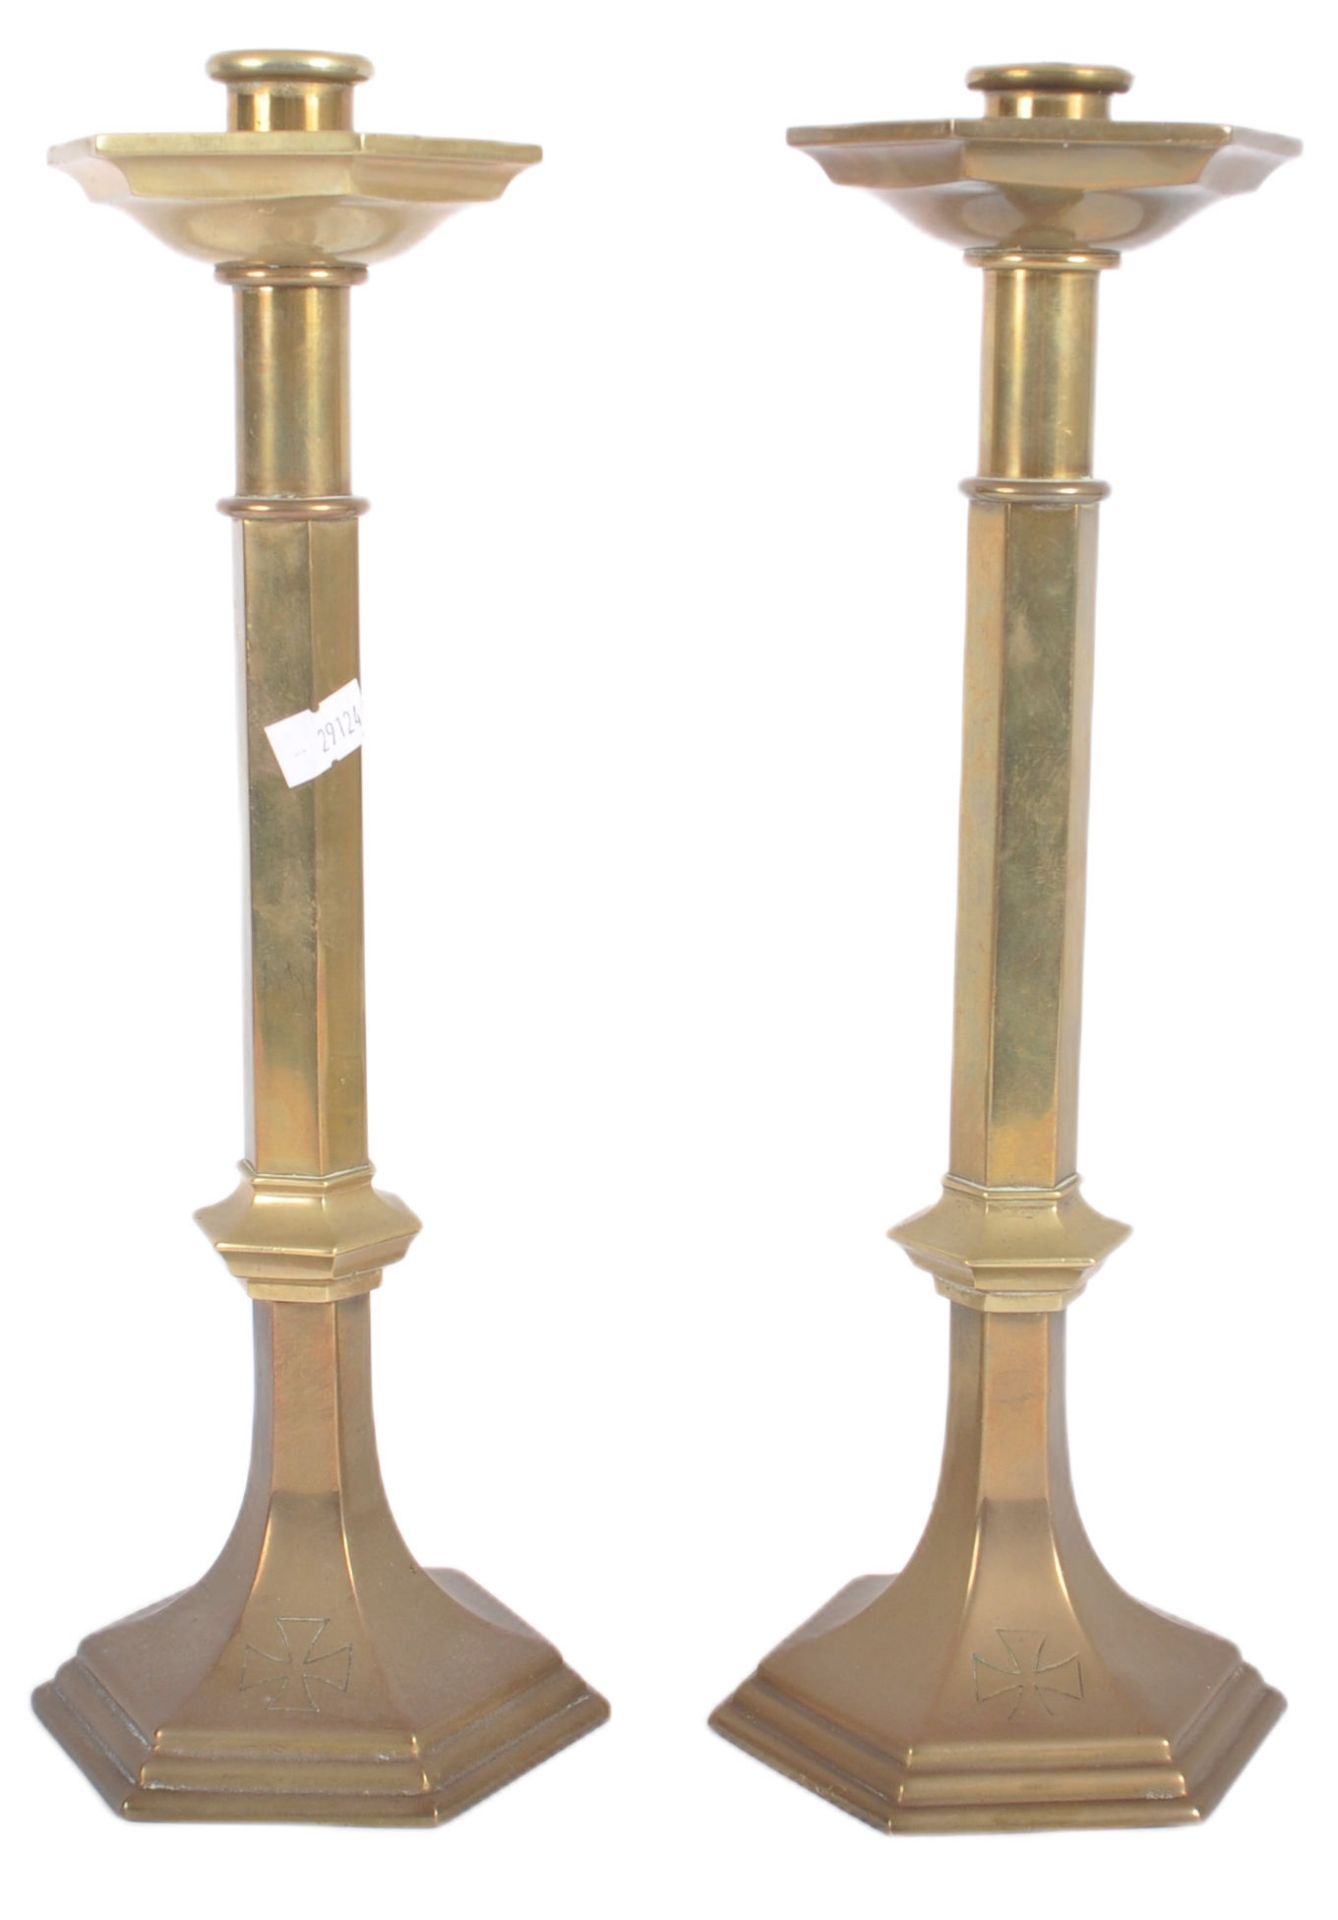 MATCHING PAIR OF MID CENTURY SOLID BRASS CANDLESTICKS